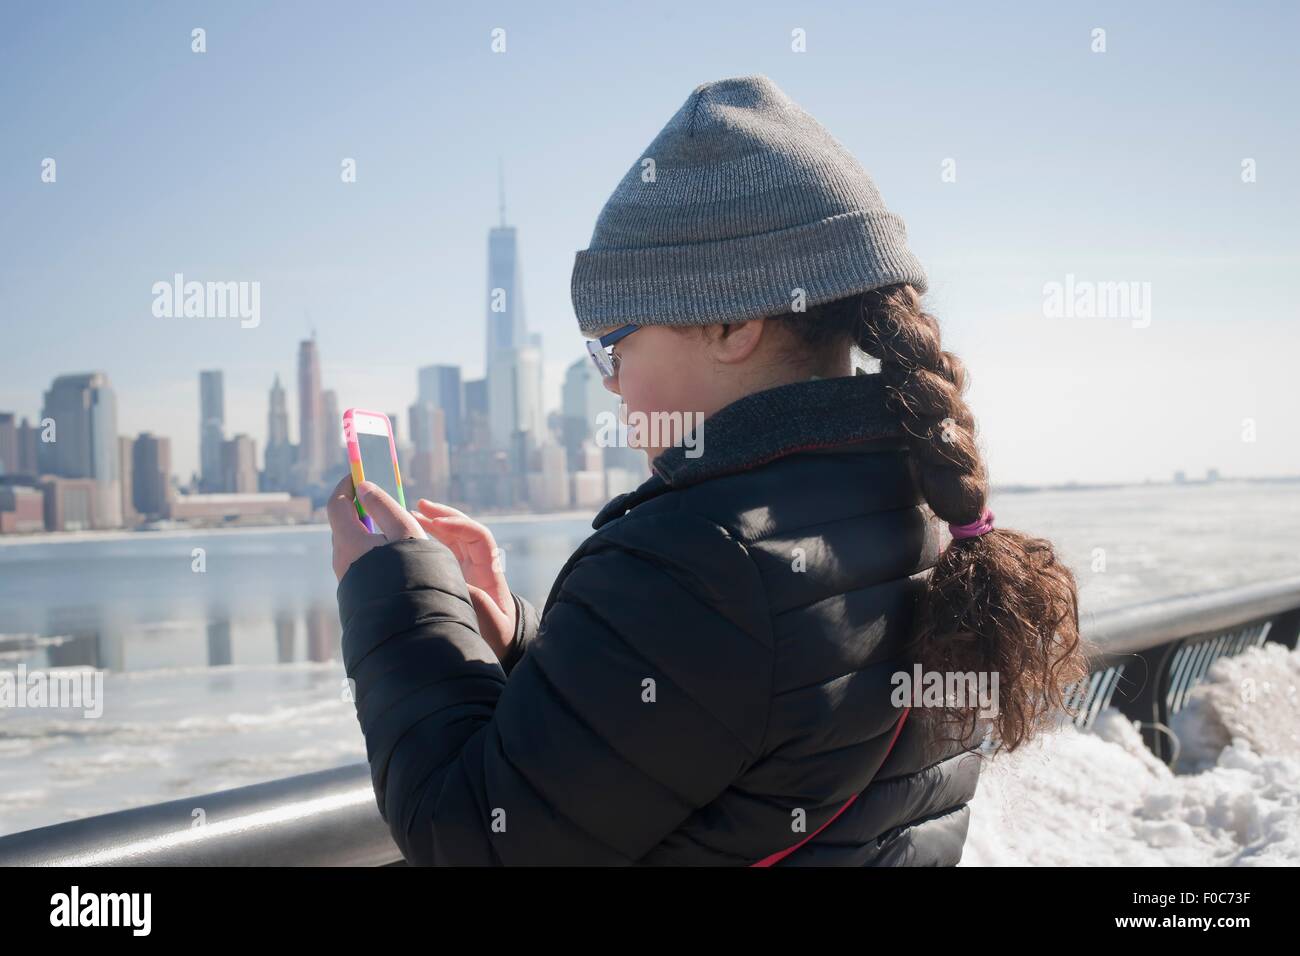 Young Girl taking photograph of skyline en utilisant smartphone, New York, NY, USA Banque D'Images